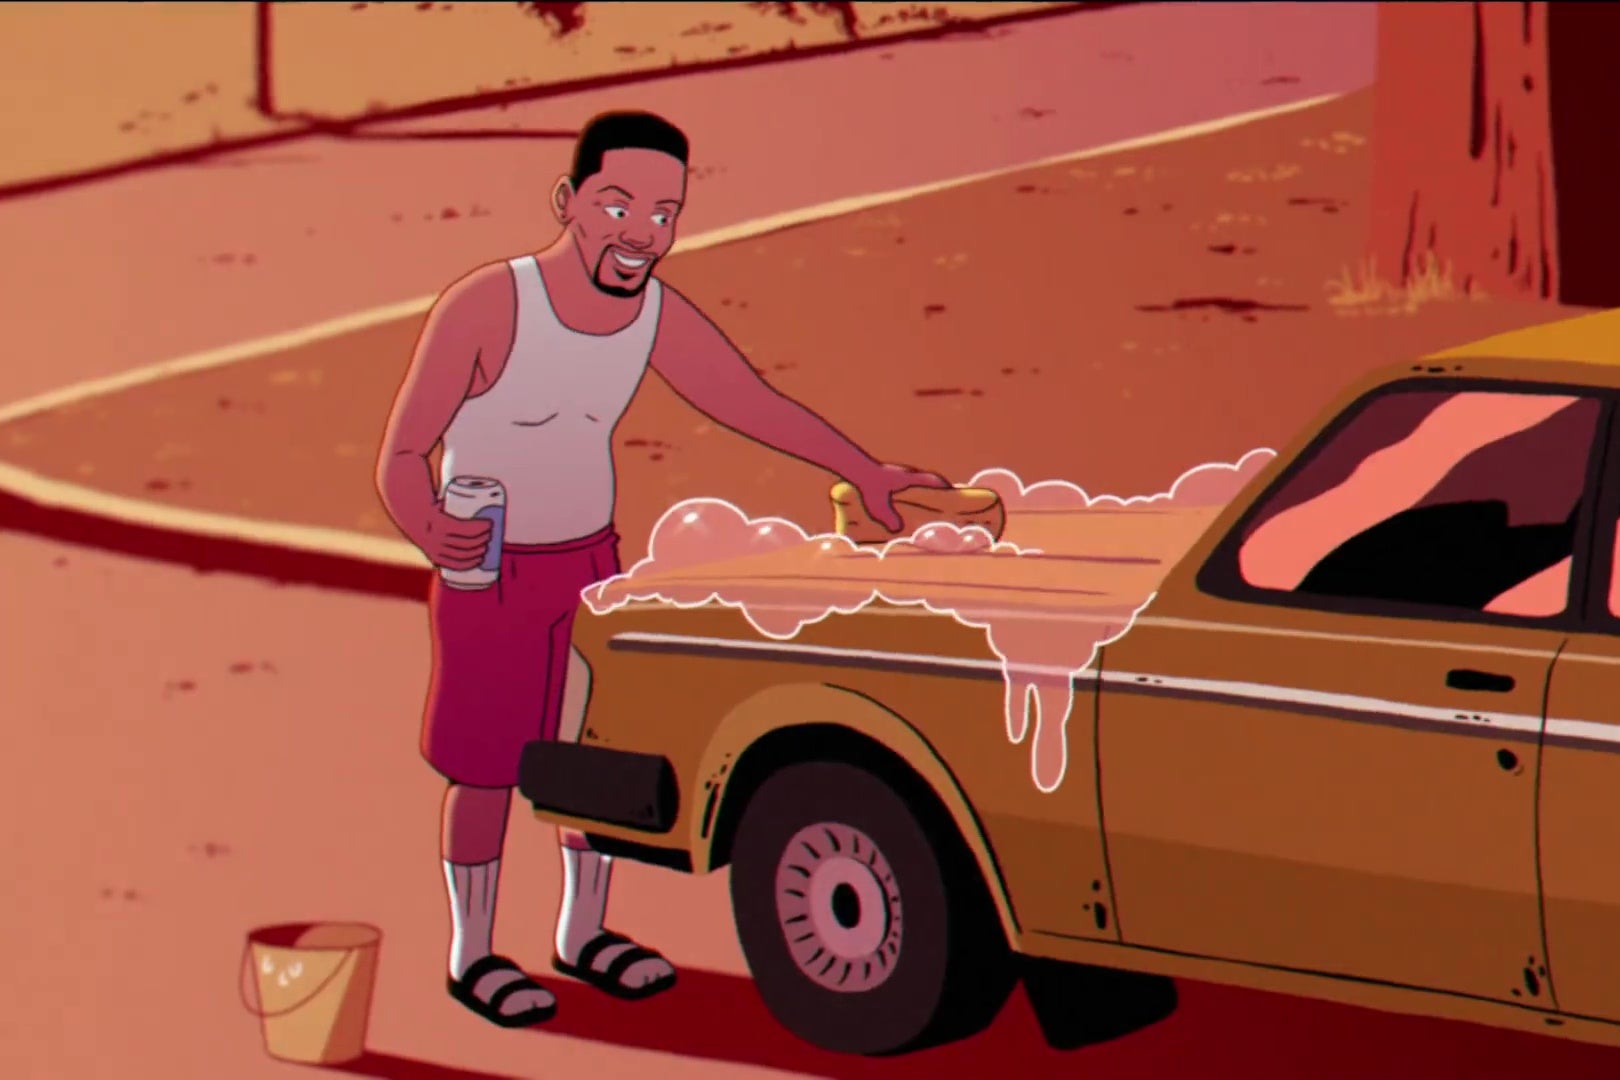 An animated version of Will Smith, wearing socks and sandals, washing his car down.